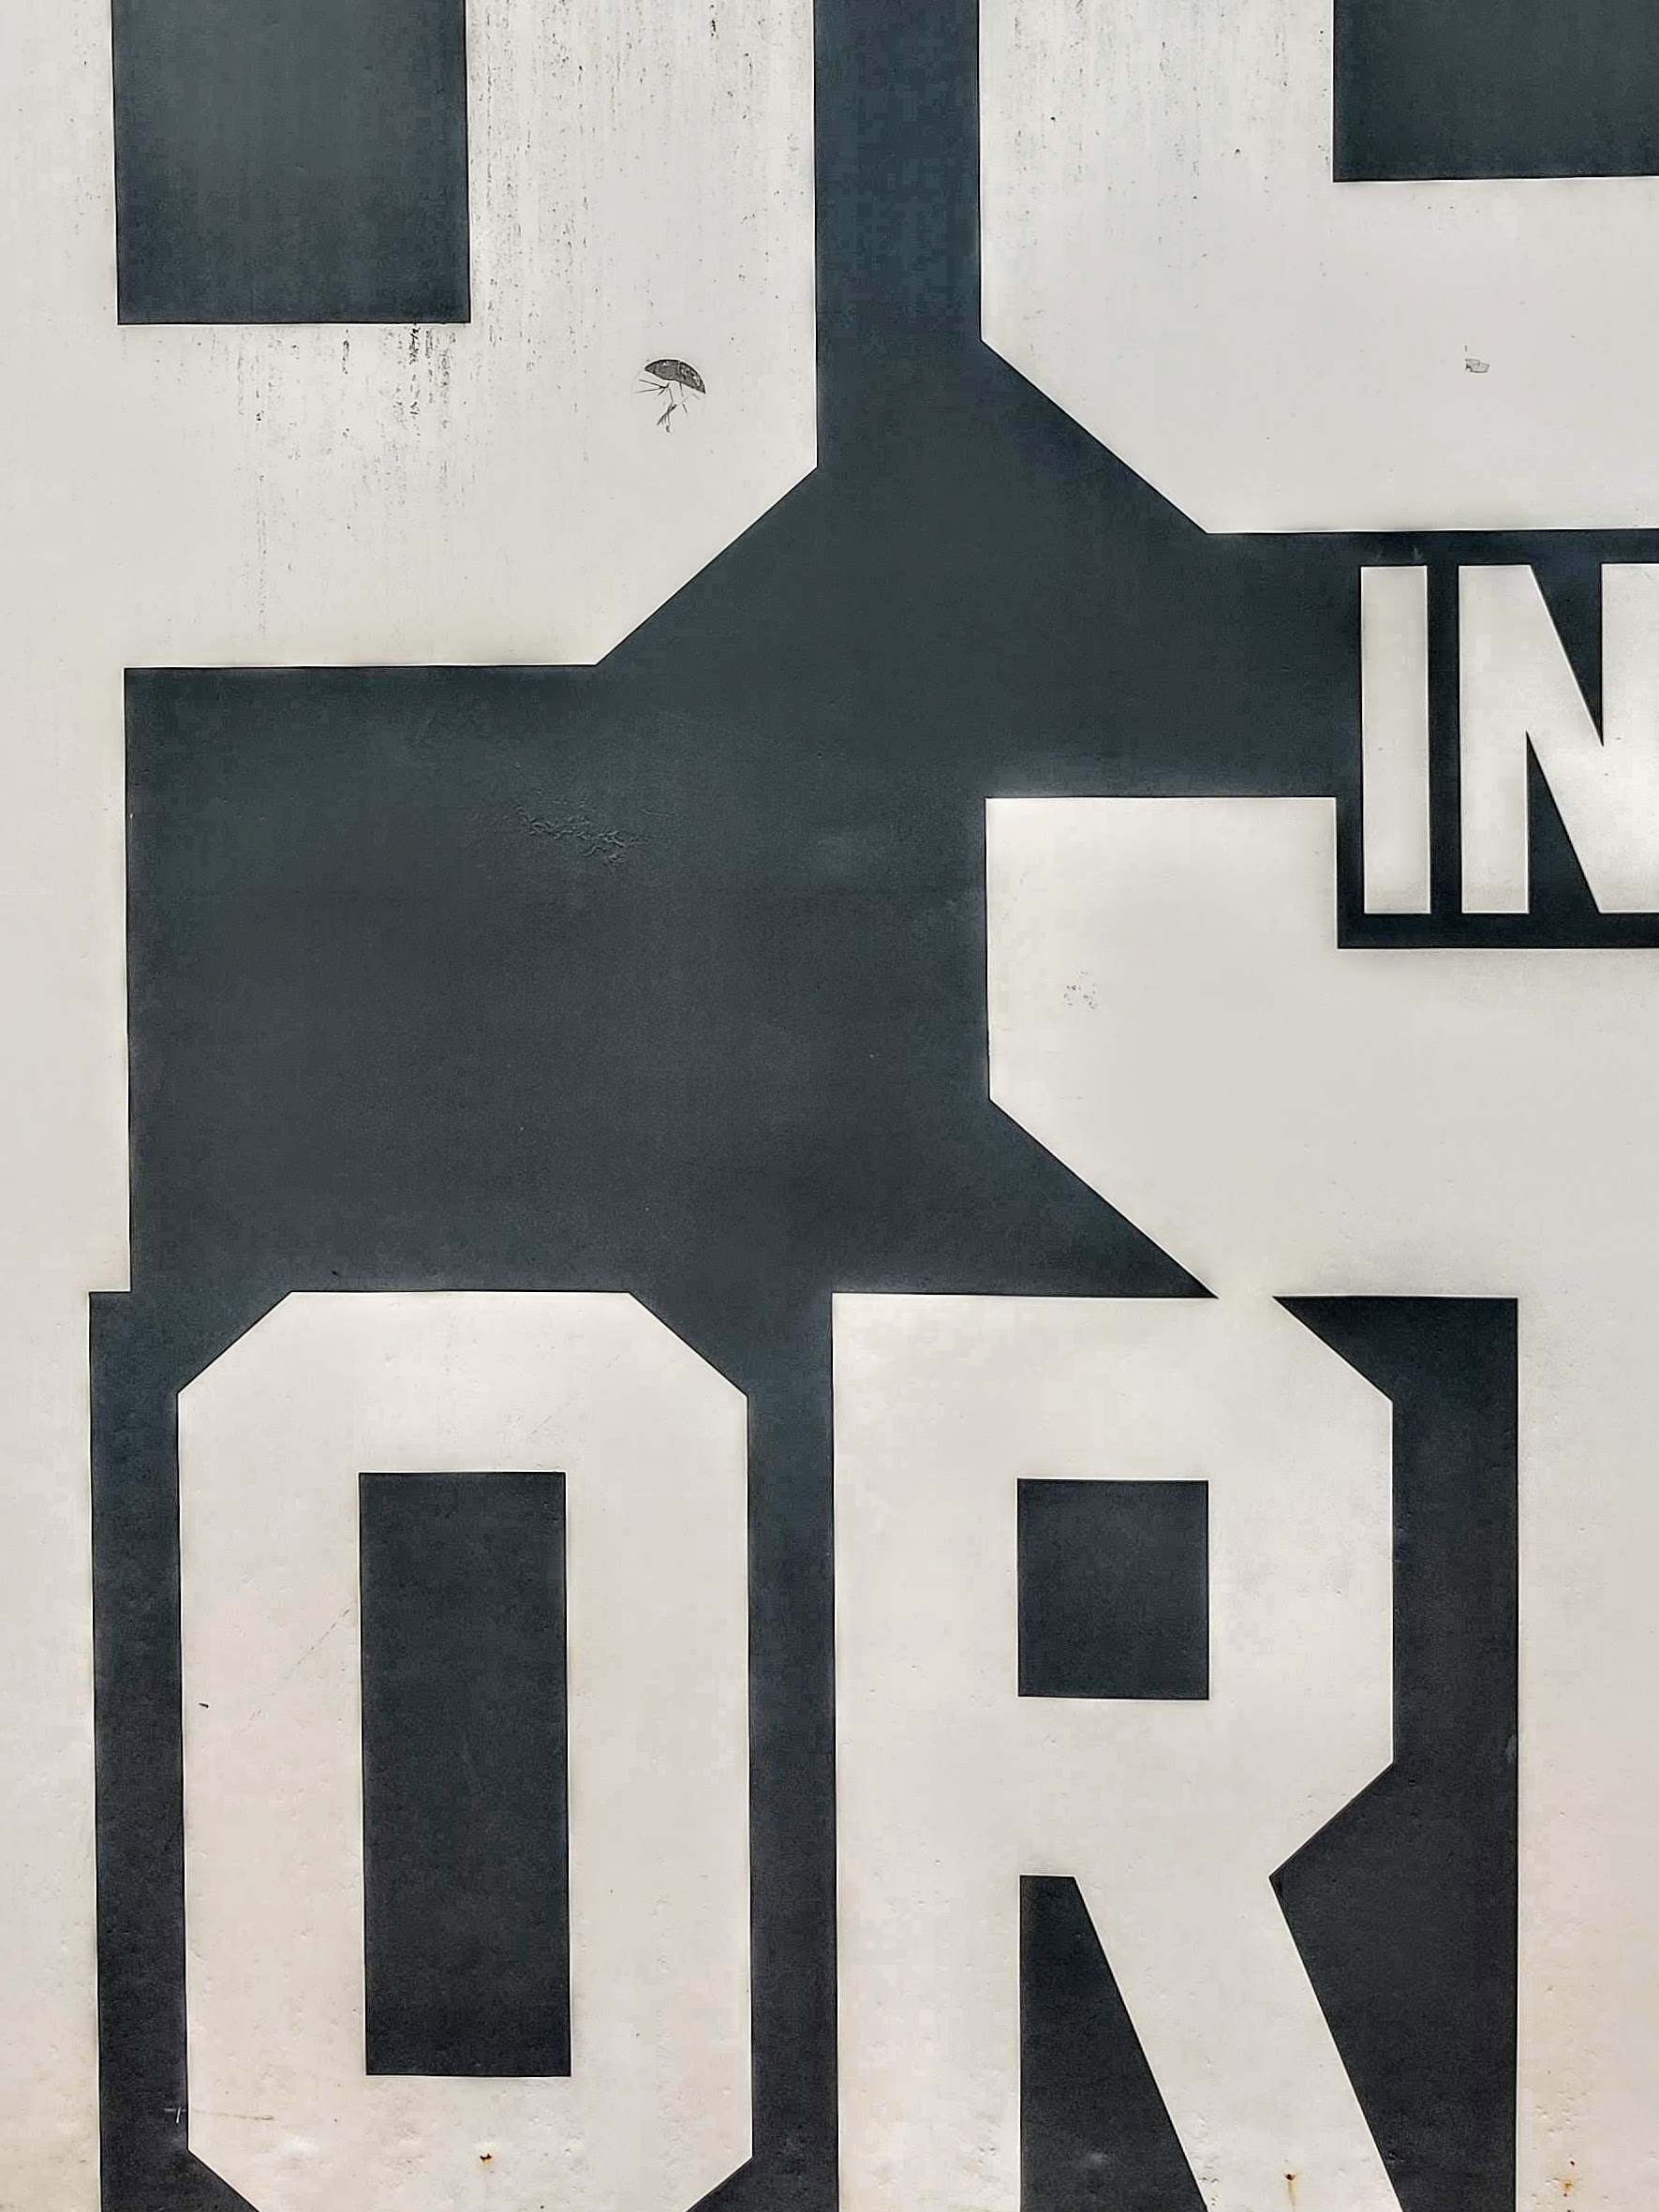 A closeup shot of large text over a black background. What it says is unclear, but it looks like parts of a P, S, the word "in", and an O and an R.